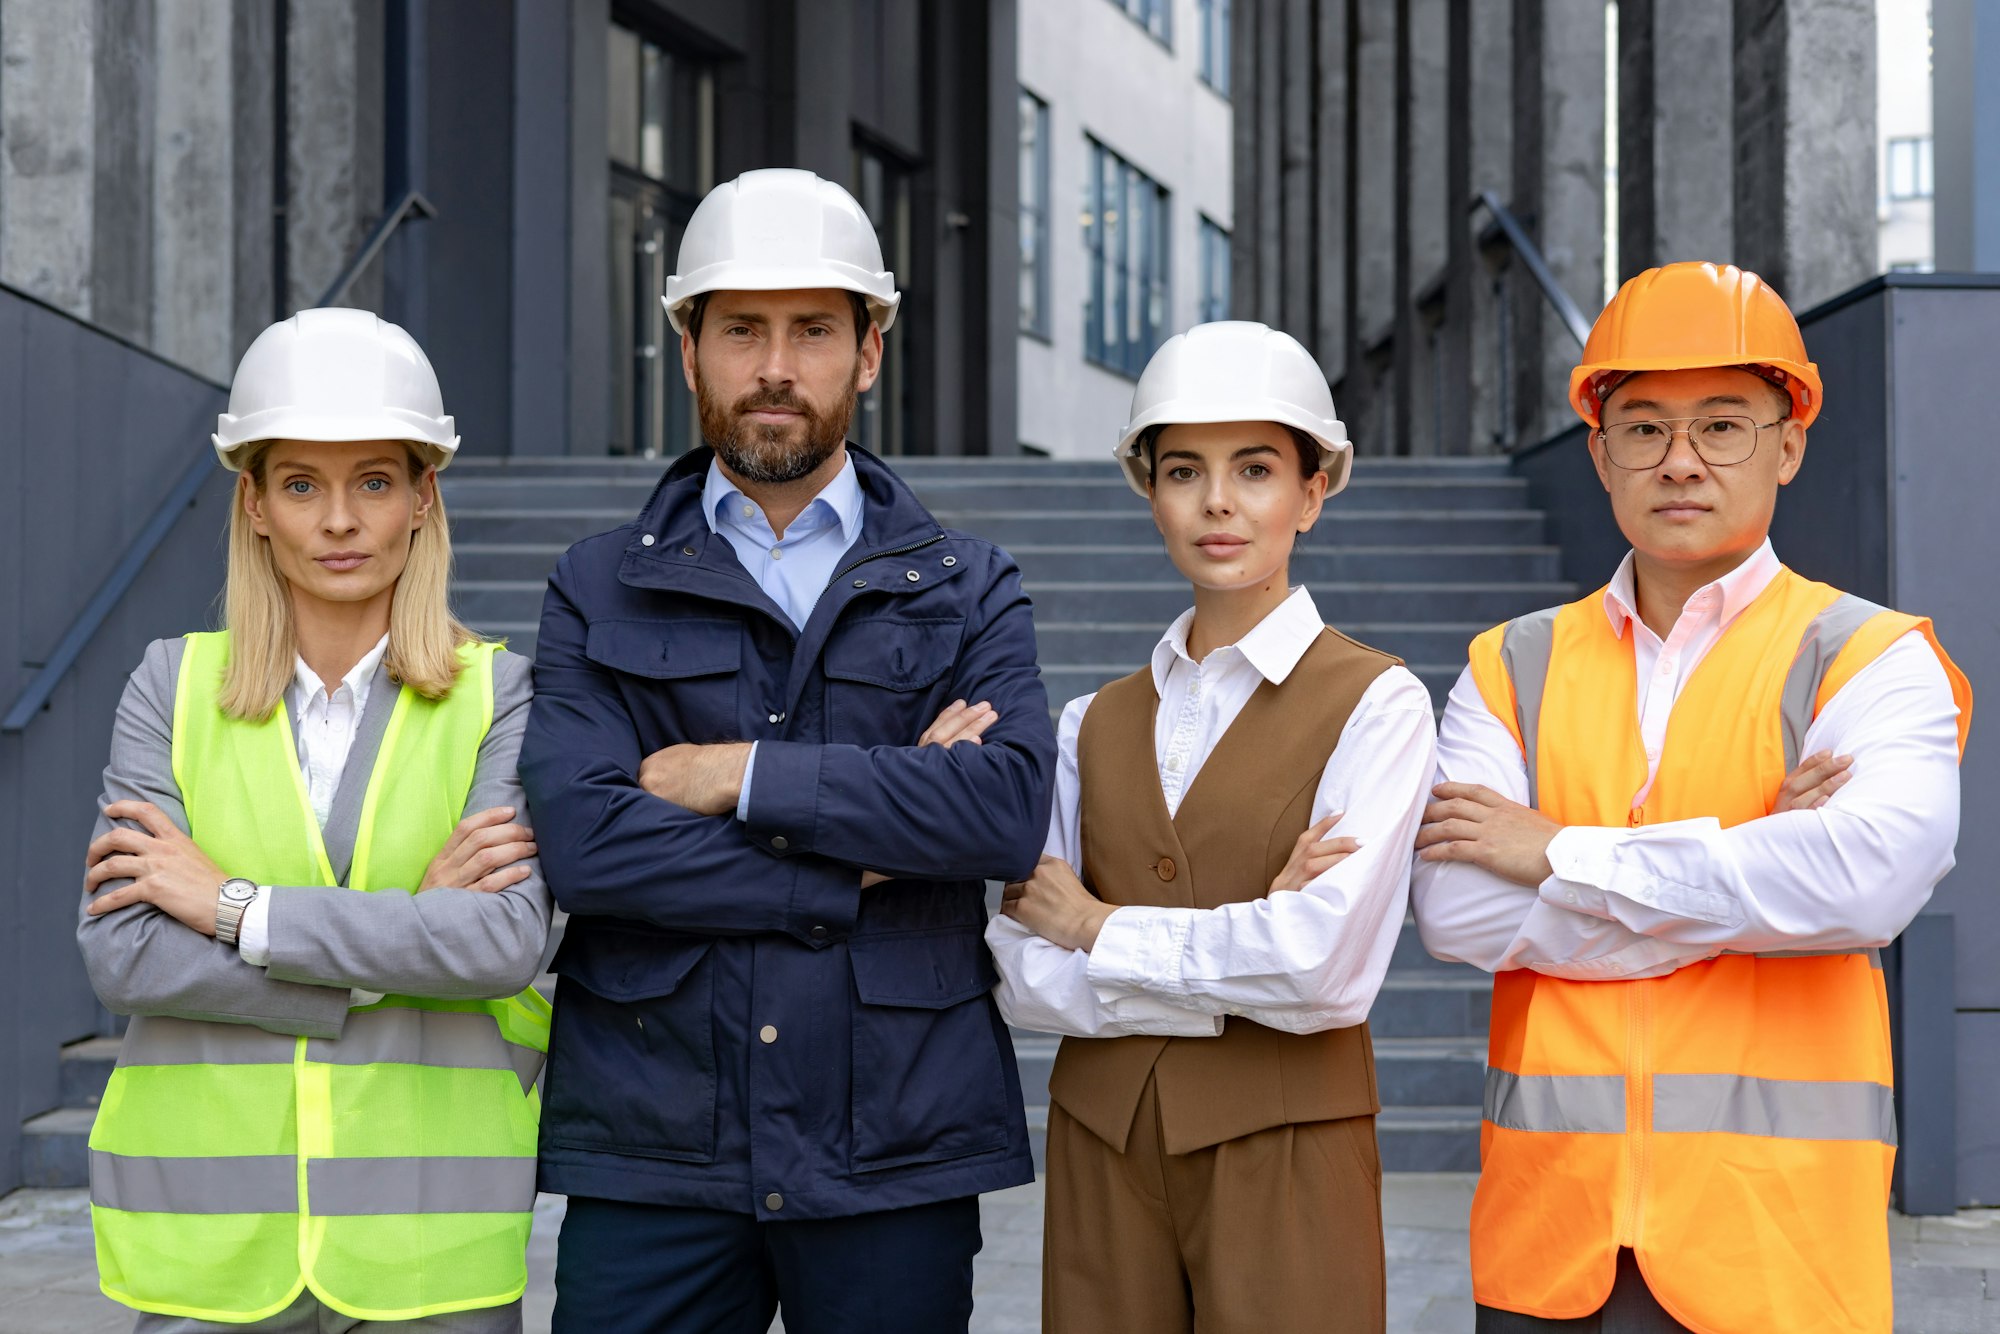 Portrait of an interracial group of men and women, a team of engineers and construction workers